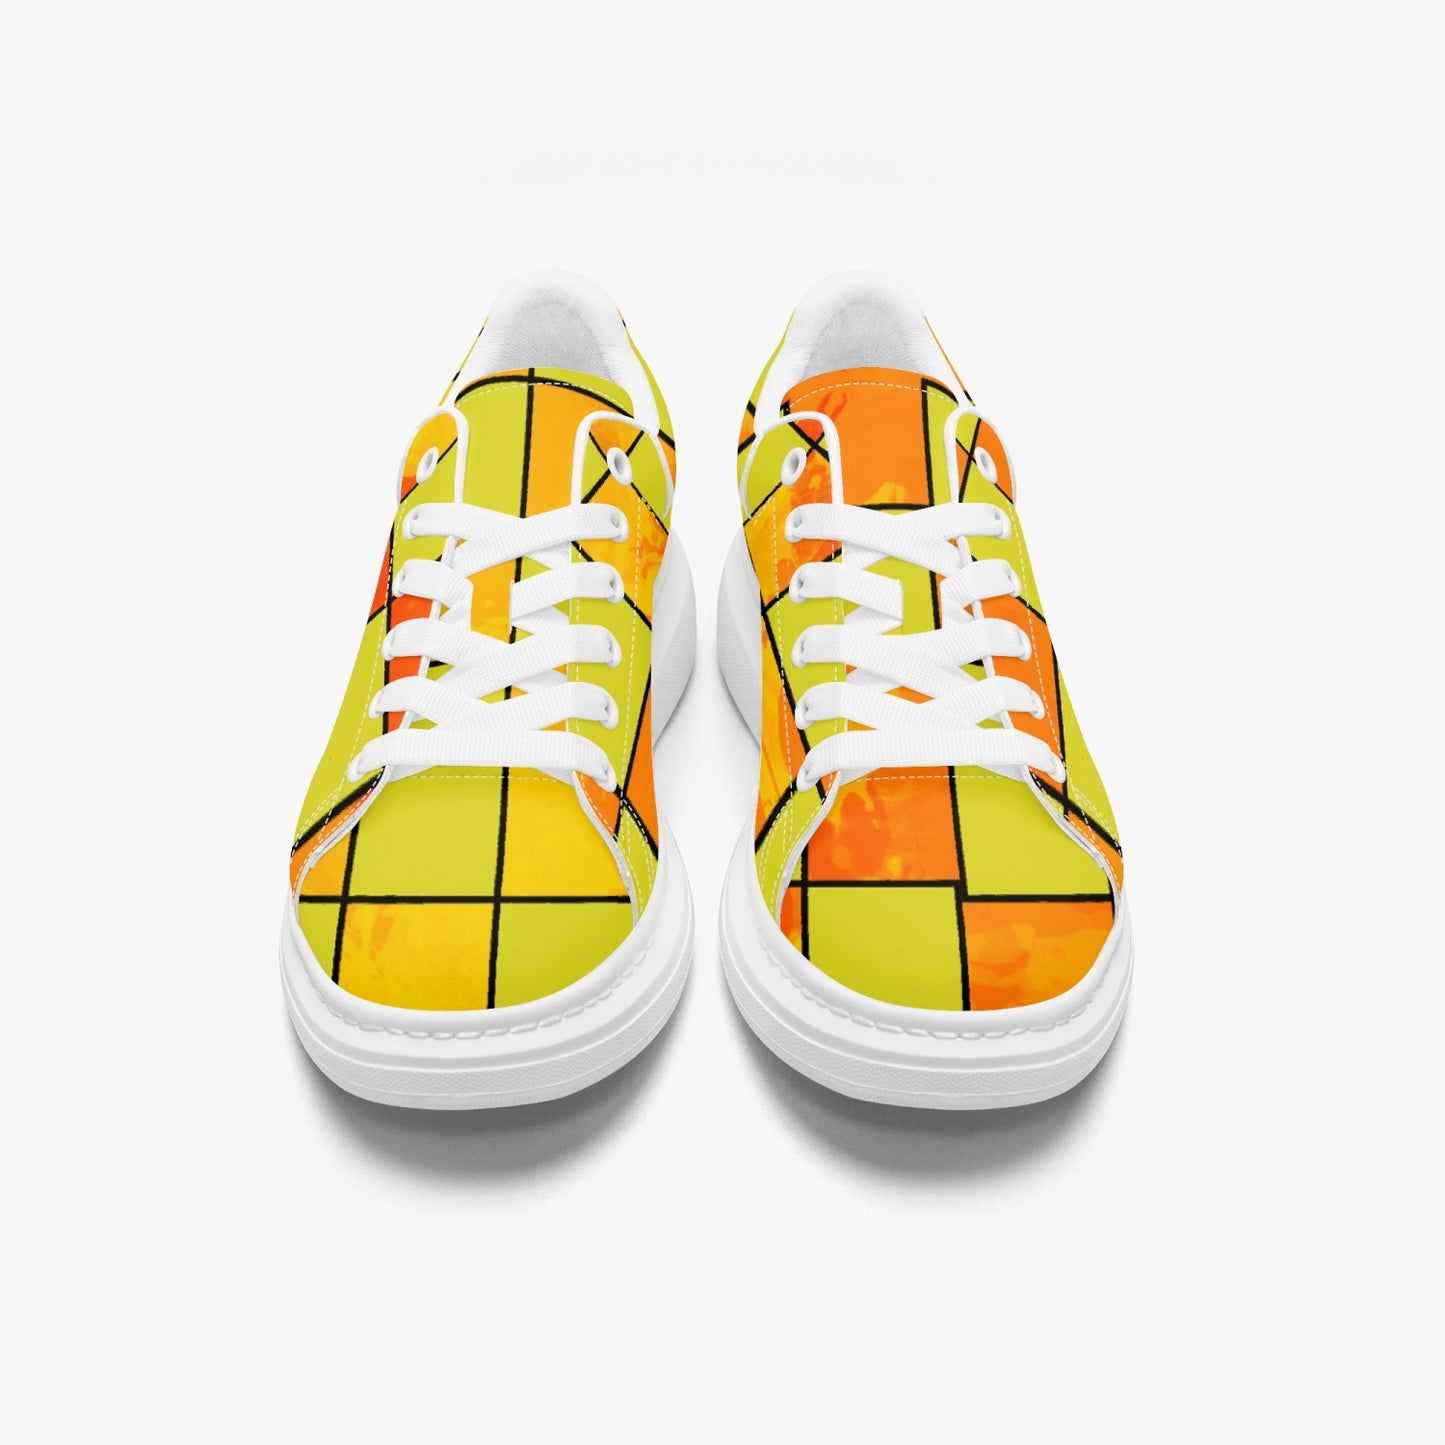 "GEO Bold" Leather Oversized Sneakers